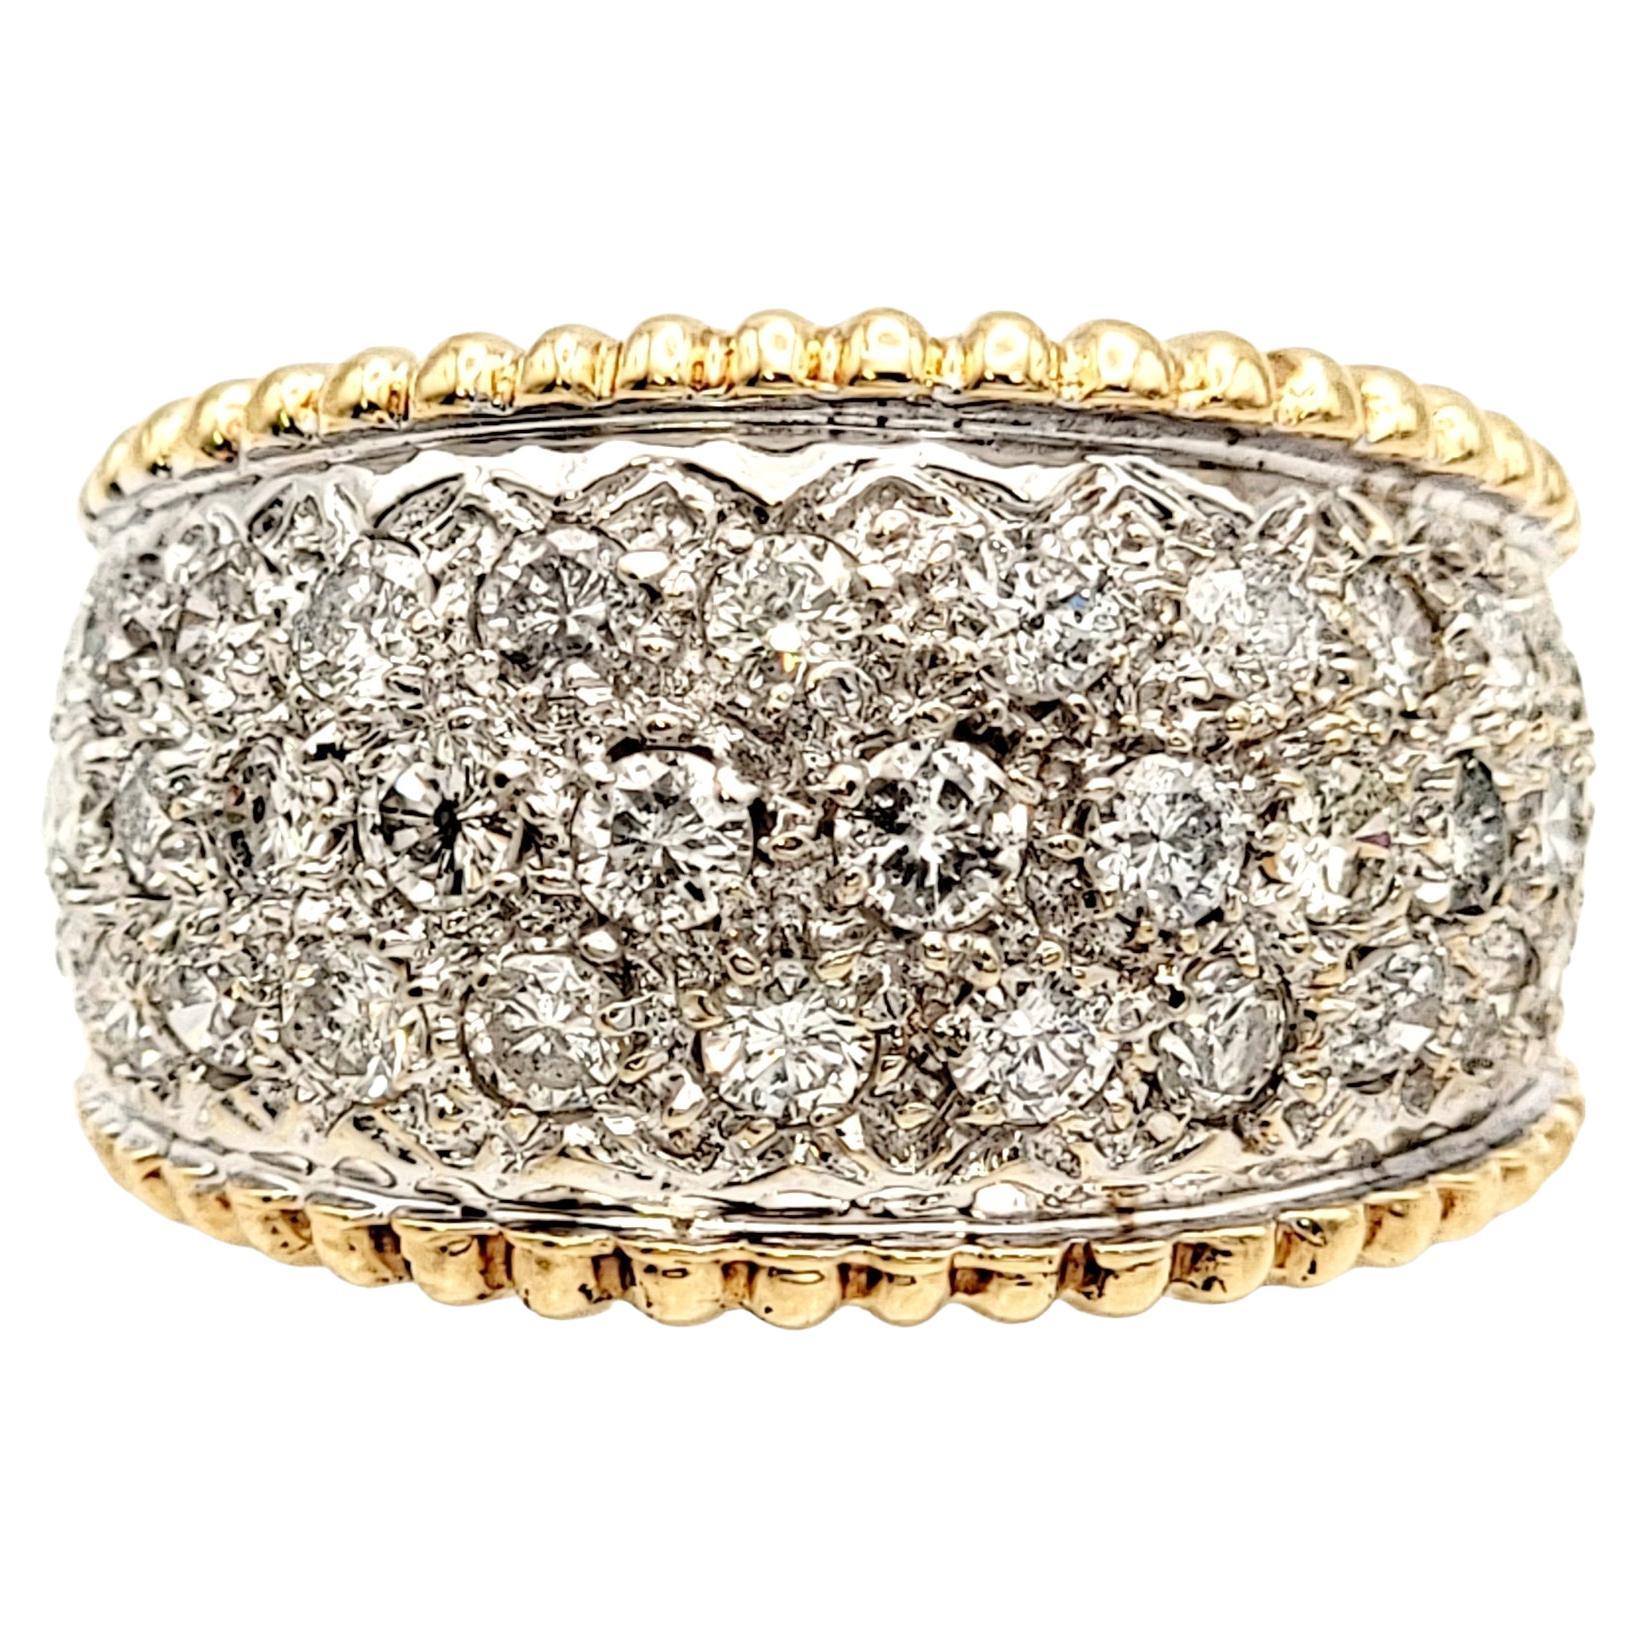 1.55 Carat Total Multi-Row Pave Diamond Wide Band Ring in Two Tone 14 Karat Gold For Sale